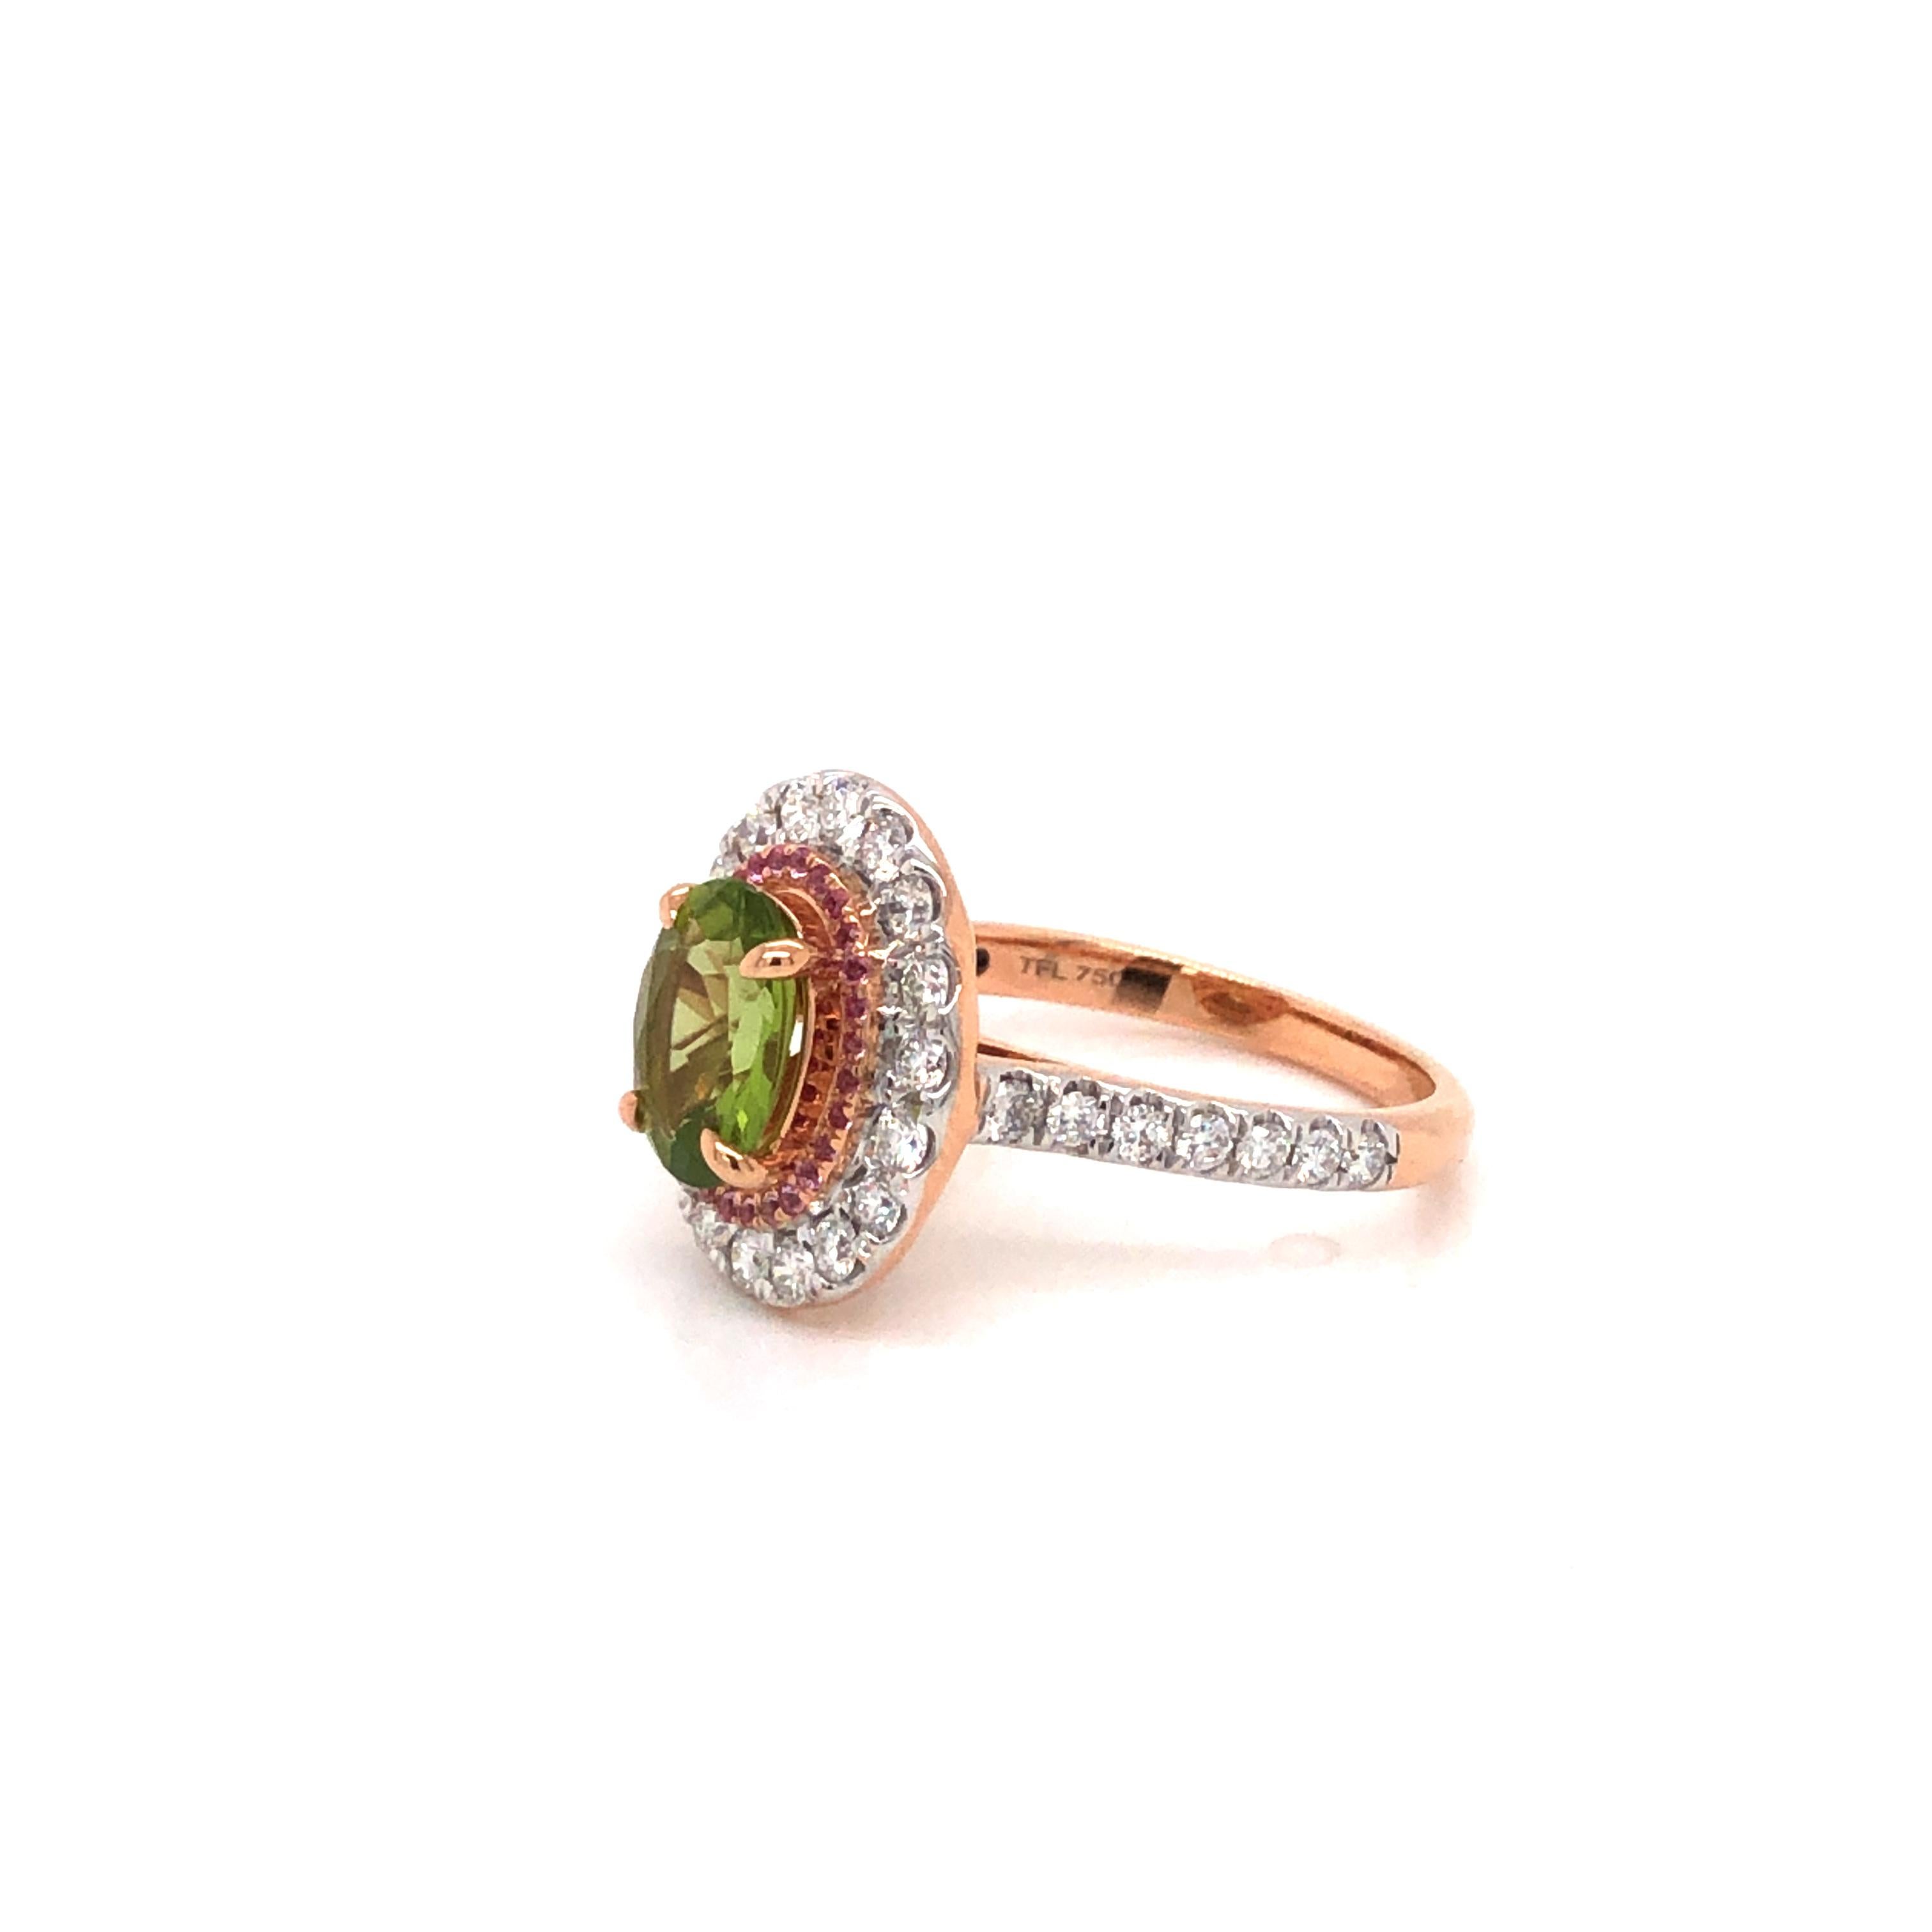 2.5 Carat Green Peridot Pink Sapphire Diamond Engagement Cocktail 18KT Ring For Sale 5